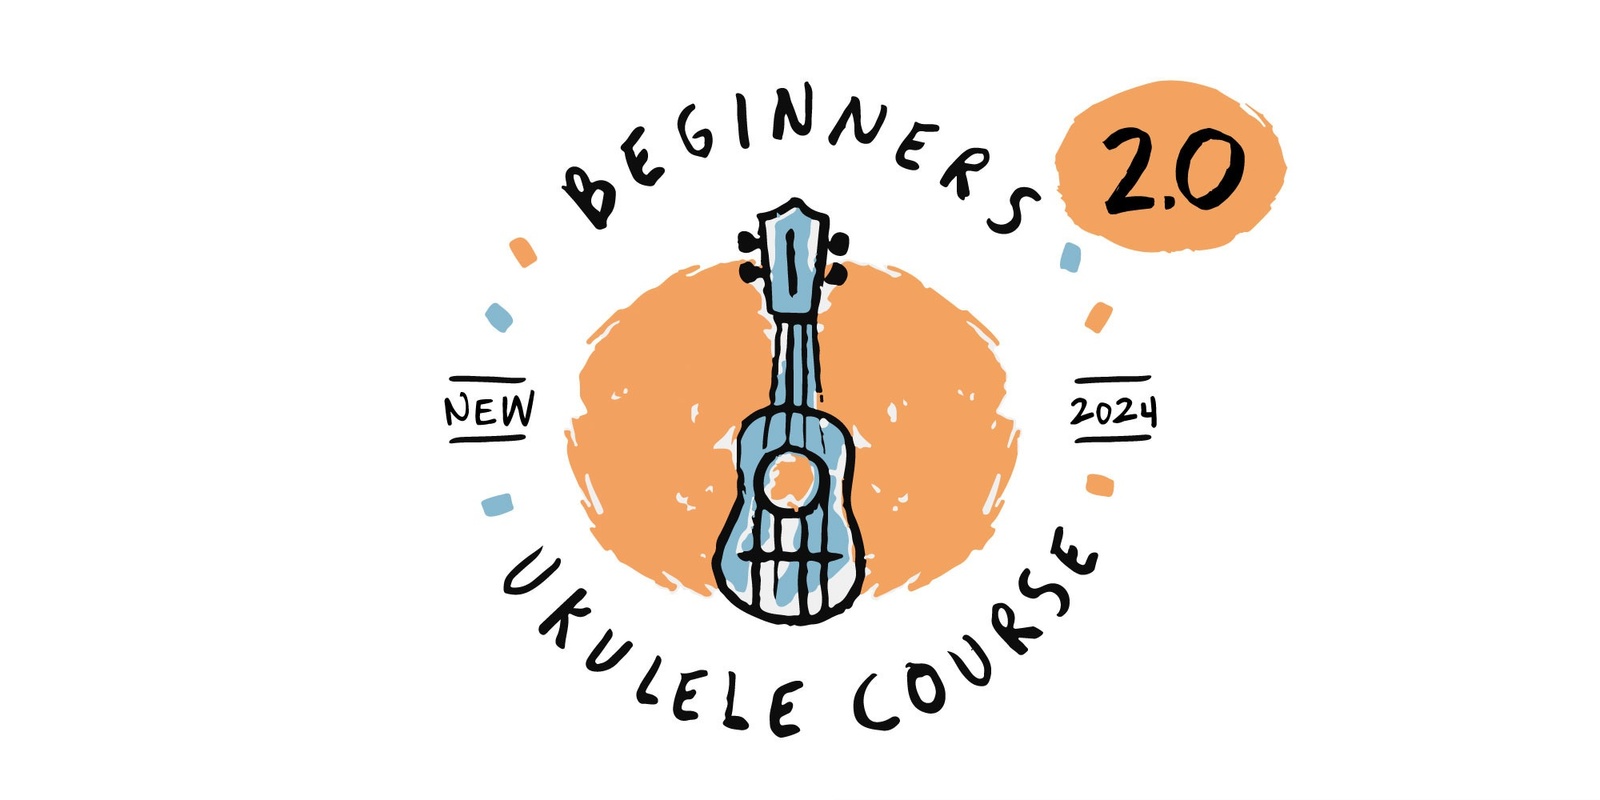 Banner image for Beginners Ukulele Course 2.0